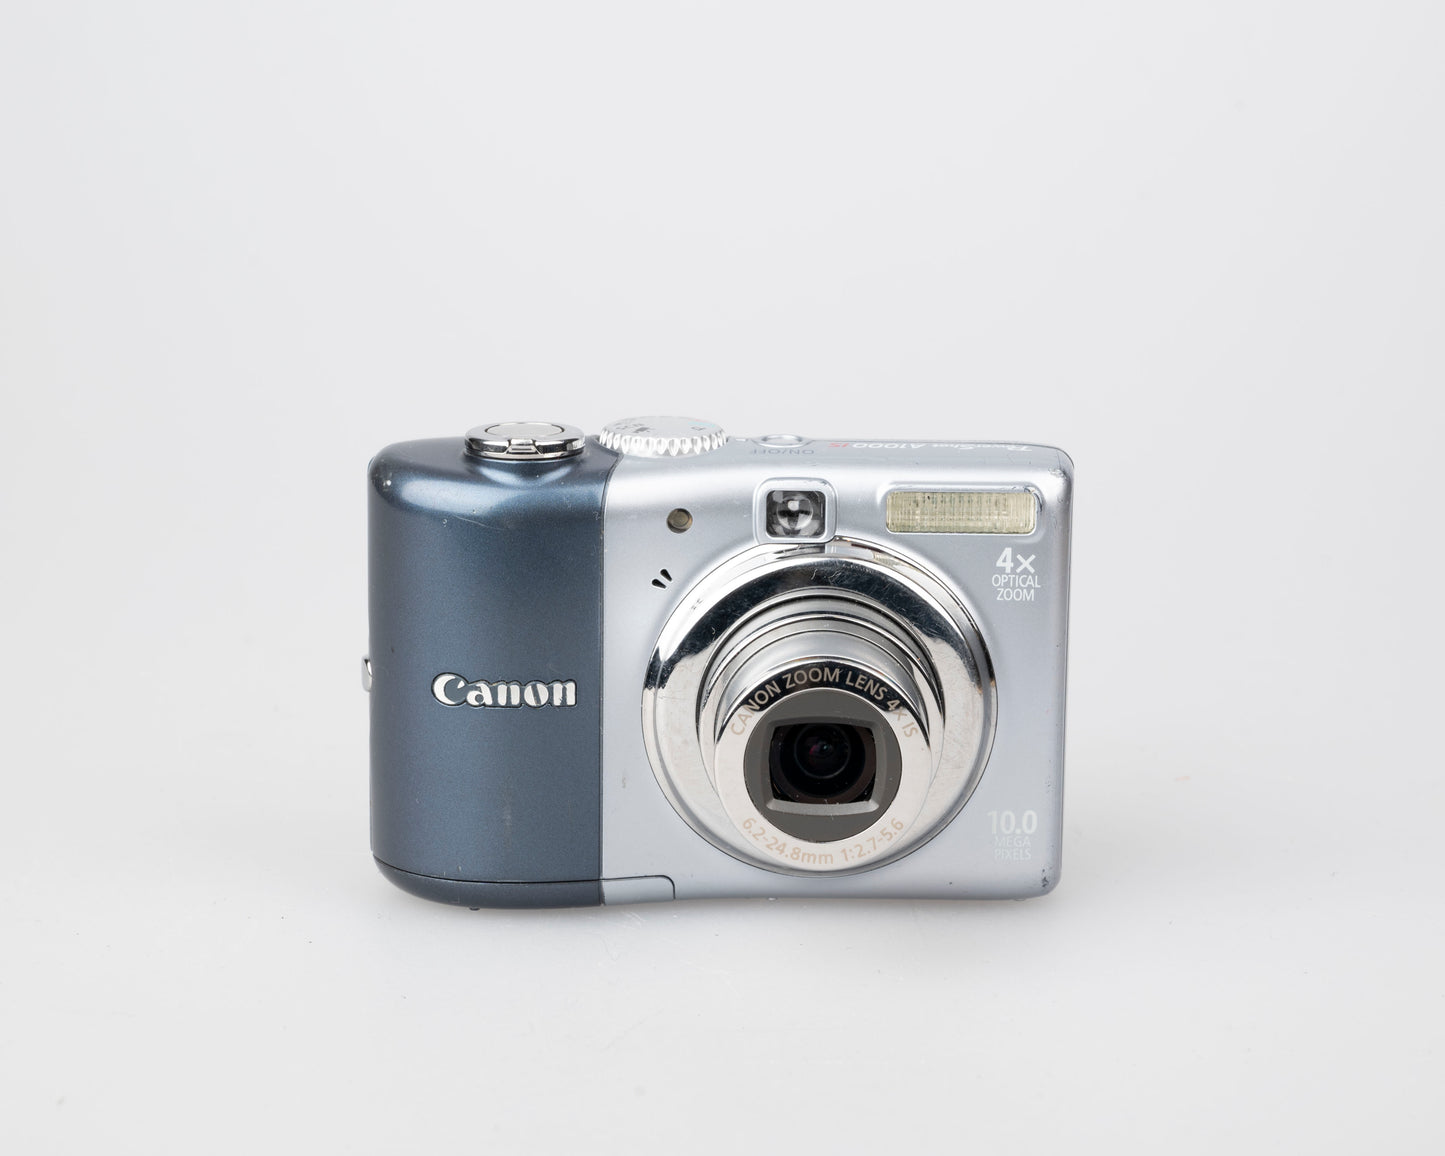 Canon Powershot A1000 IS digicam 10 MP CCD sensor (uses AA batteries and SD memory cards)